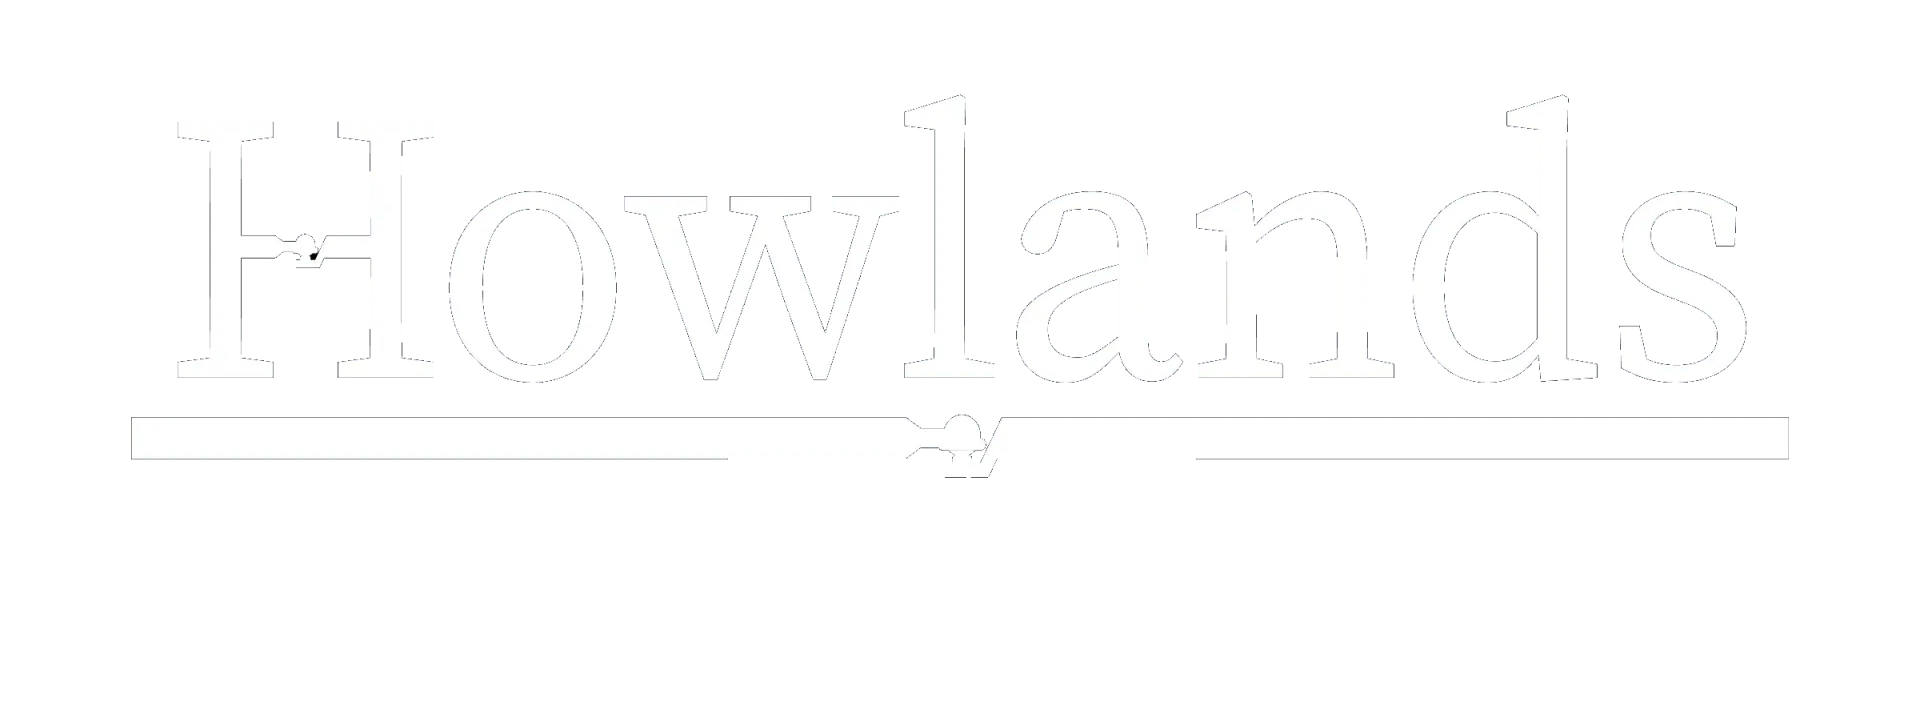 Howlands Trailers & Truck Accessories logo